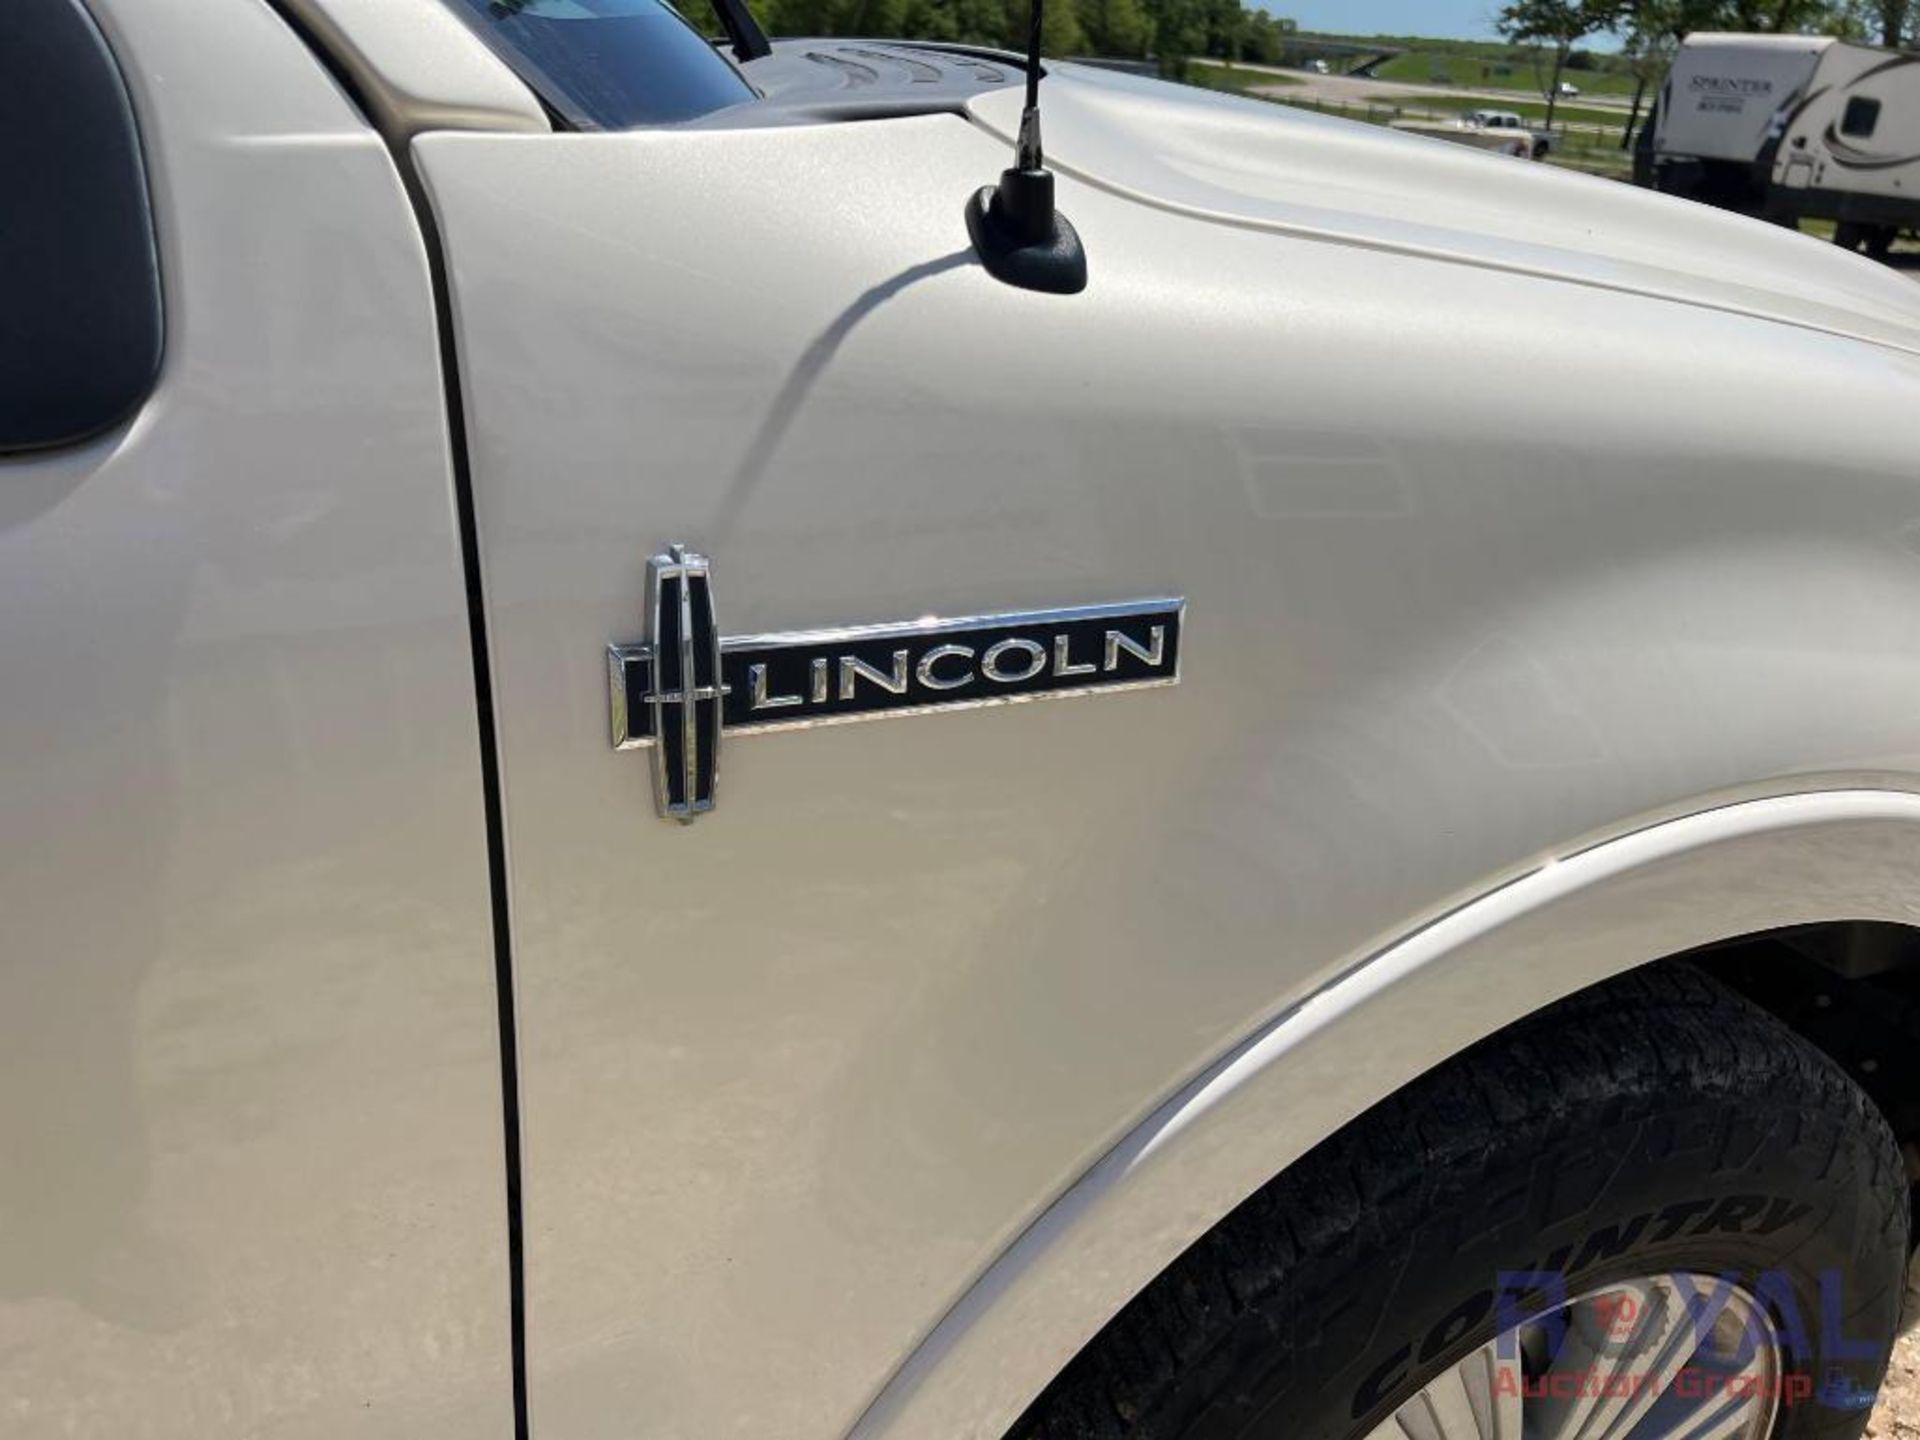 2015 Lincoln Mark LT Crew Cab Pickup Truck - Image 53 of 75